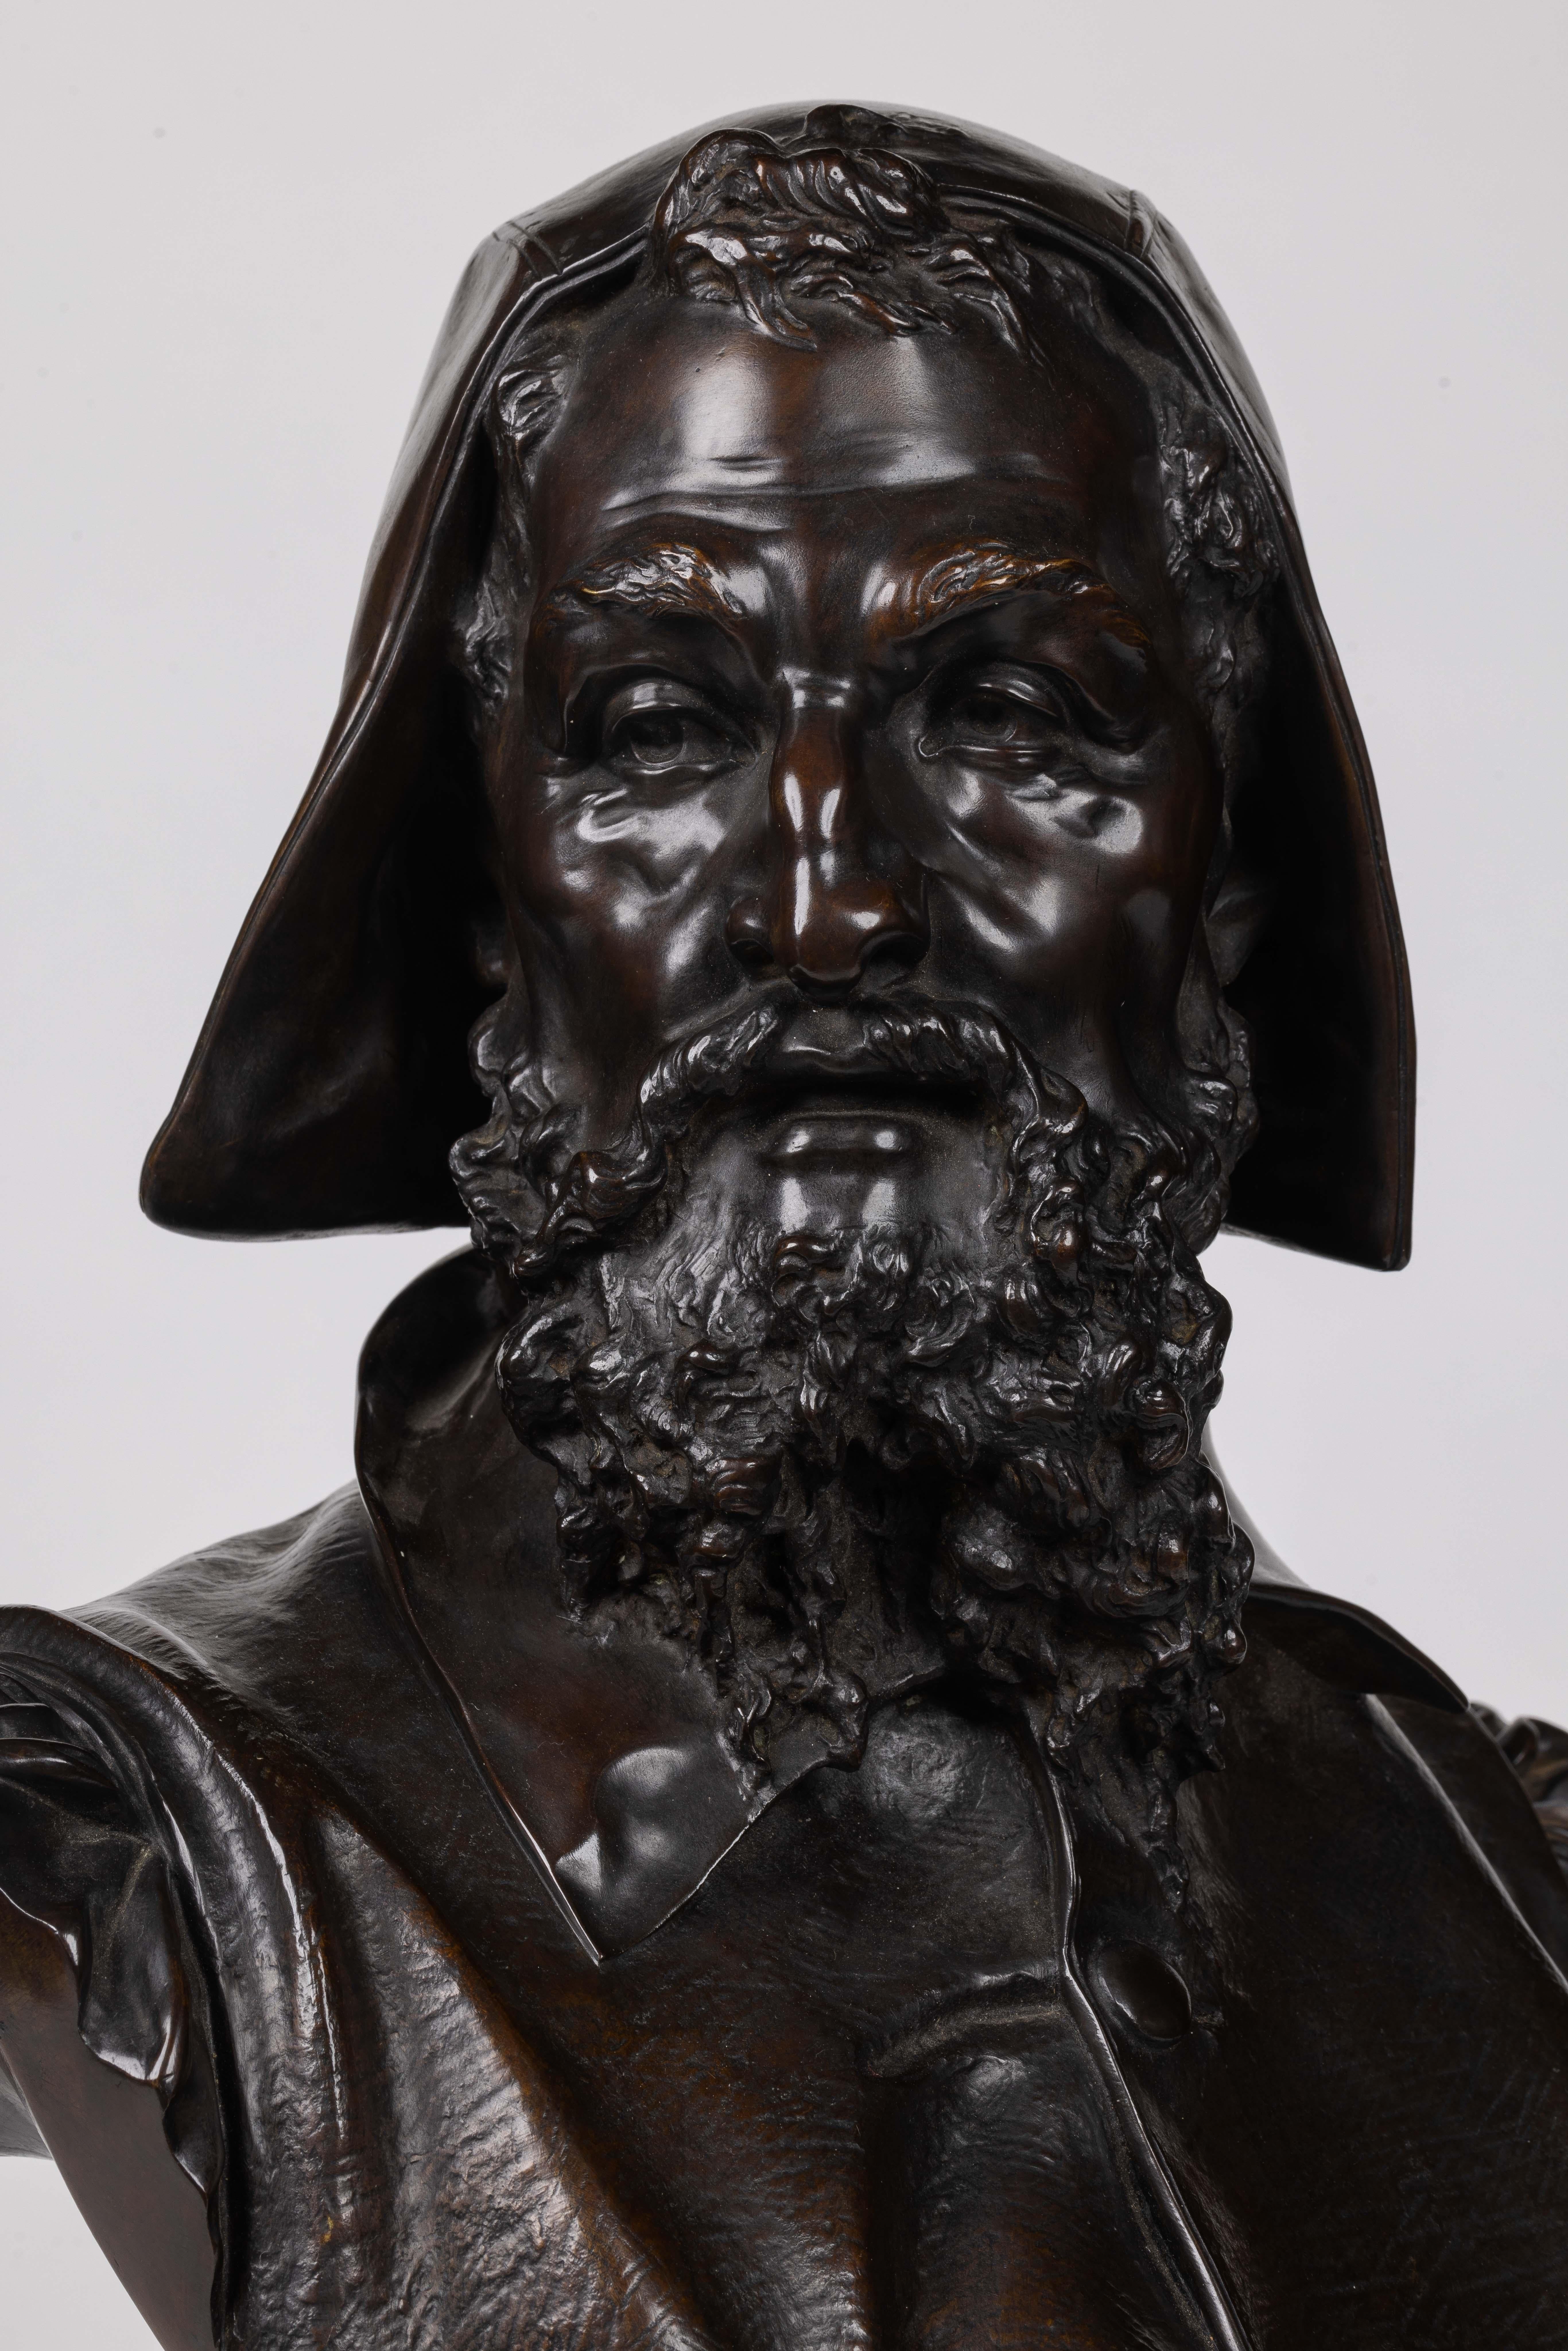 Albert-Ernest Carrier-Belleuse, A Rare and Important Bronze Bust of Michelangelo For Sale 1